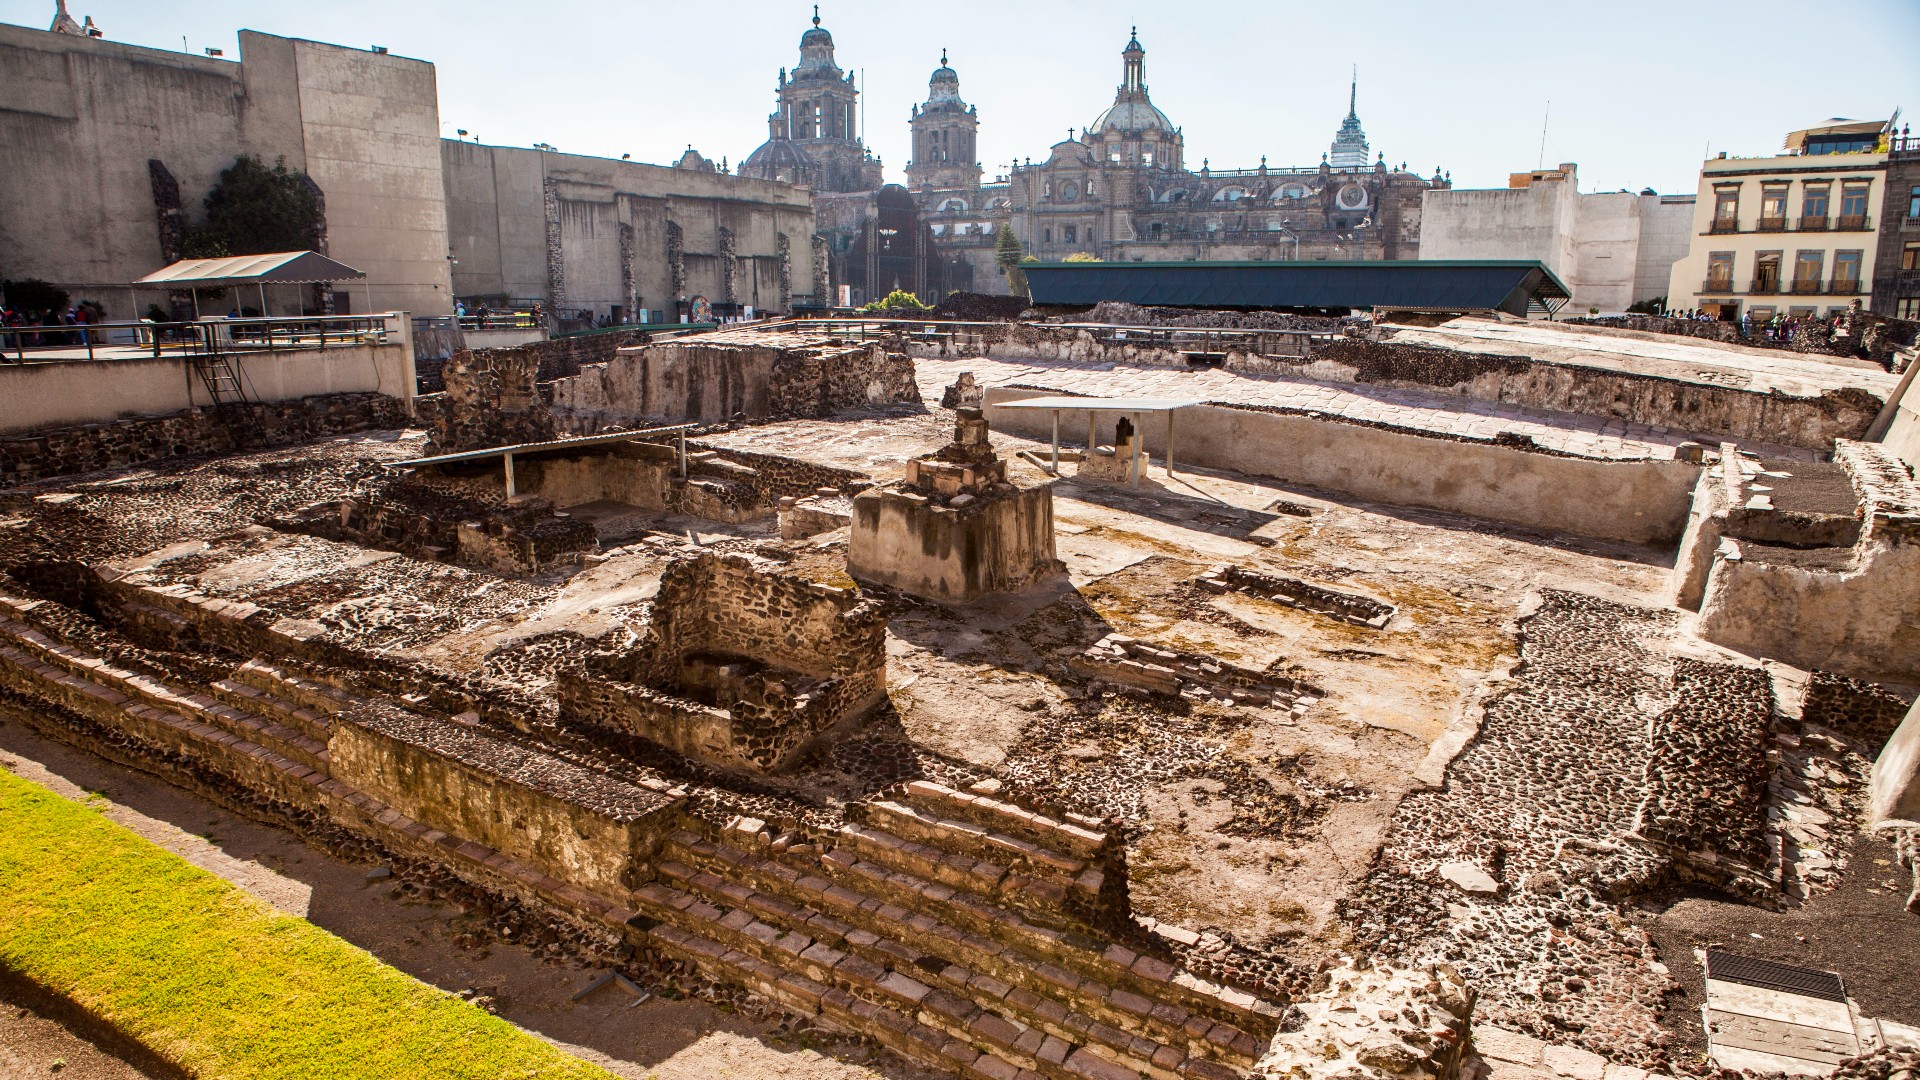 An image of the ruins of the Templo Mayor which was once one of the main temples of the Aztecs. Only the foundation is left and some steps at the building’s side.